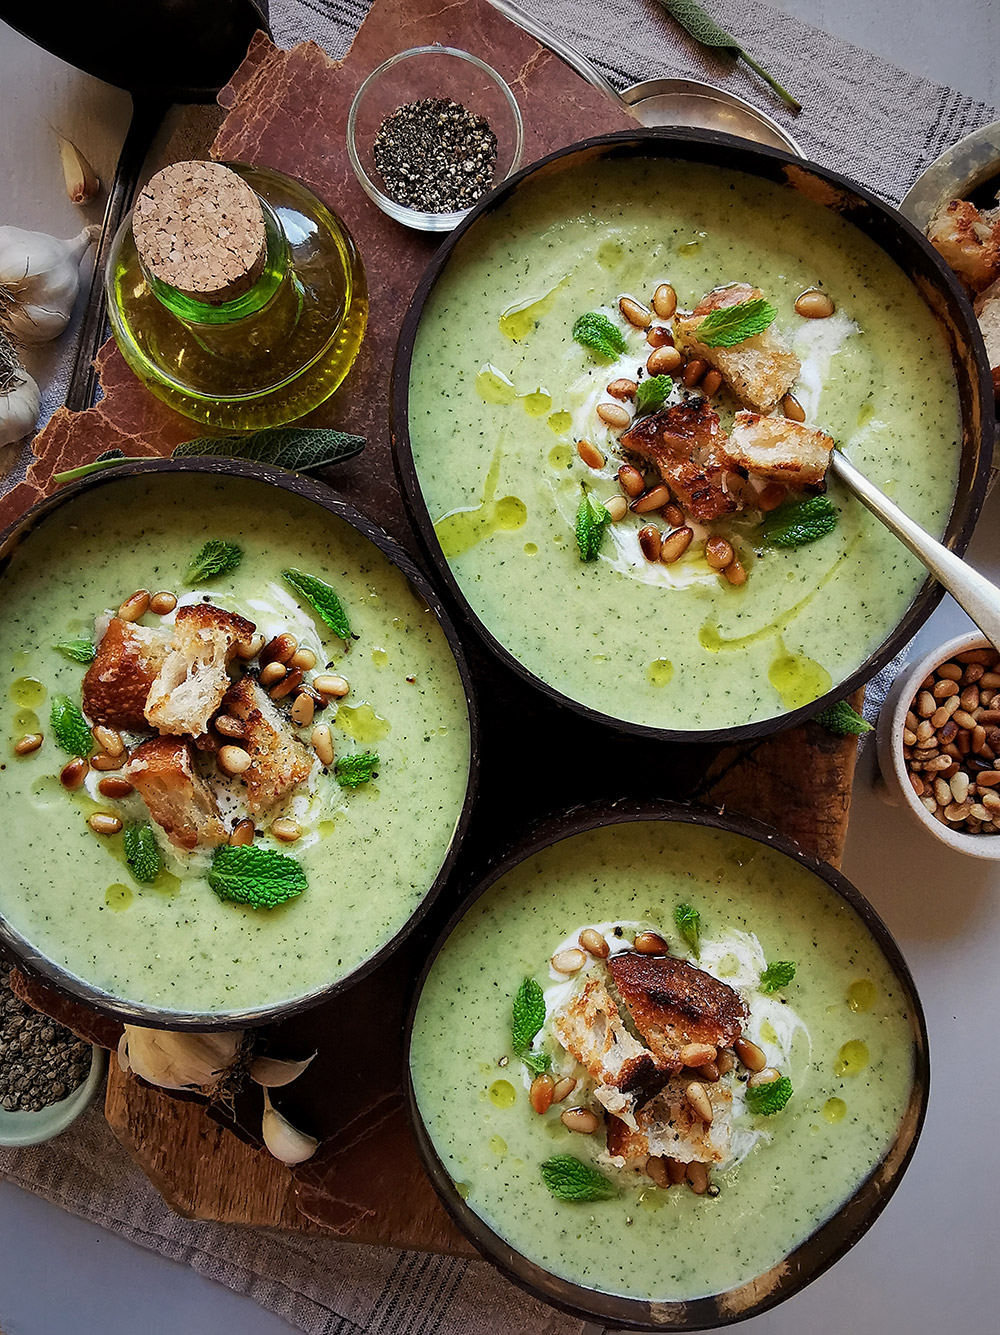 Roasted courgette cream soup